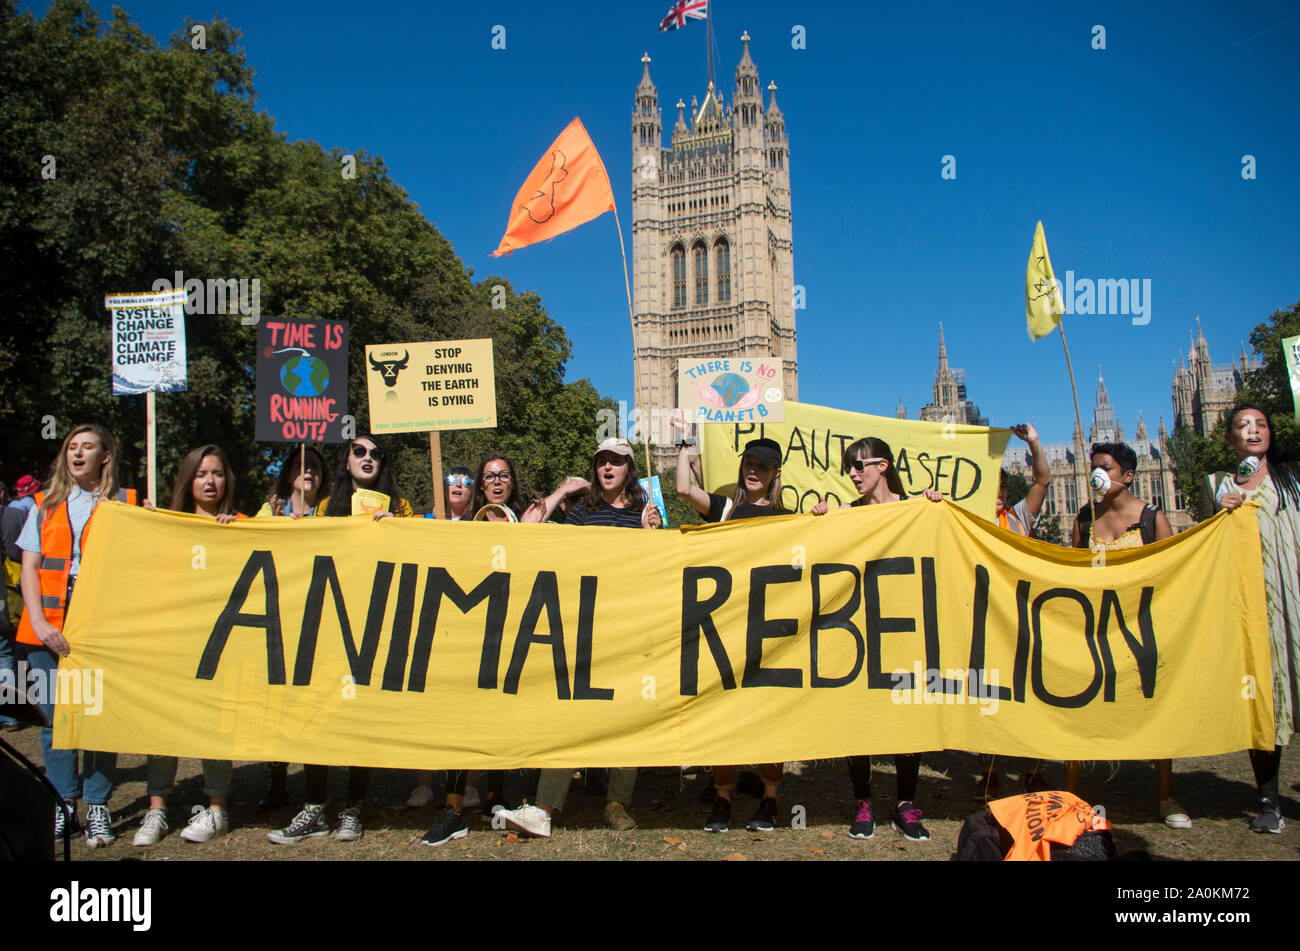 London, UK. 20 September 2019. Supporters of Animal Revolution, who are pushing for an immediate end to animal agriculture and fishing. Around 100,000 people, led by school children on strike, marched in Westminster, London, calling for urgent action to combat the climate crisis. Similar protests were held across the UK, and around the World. © Stuart Walden/ Alamy Stock Photo